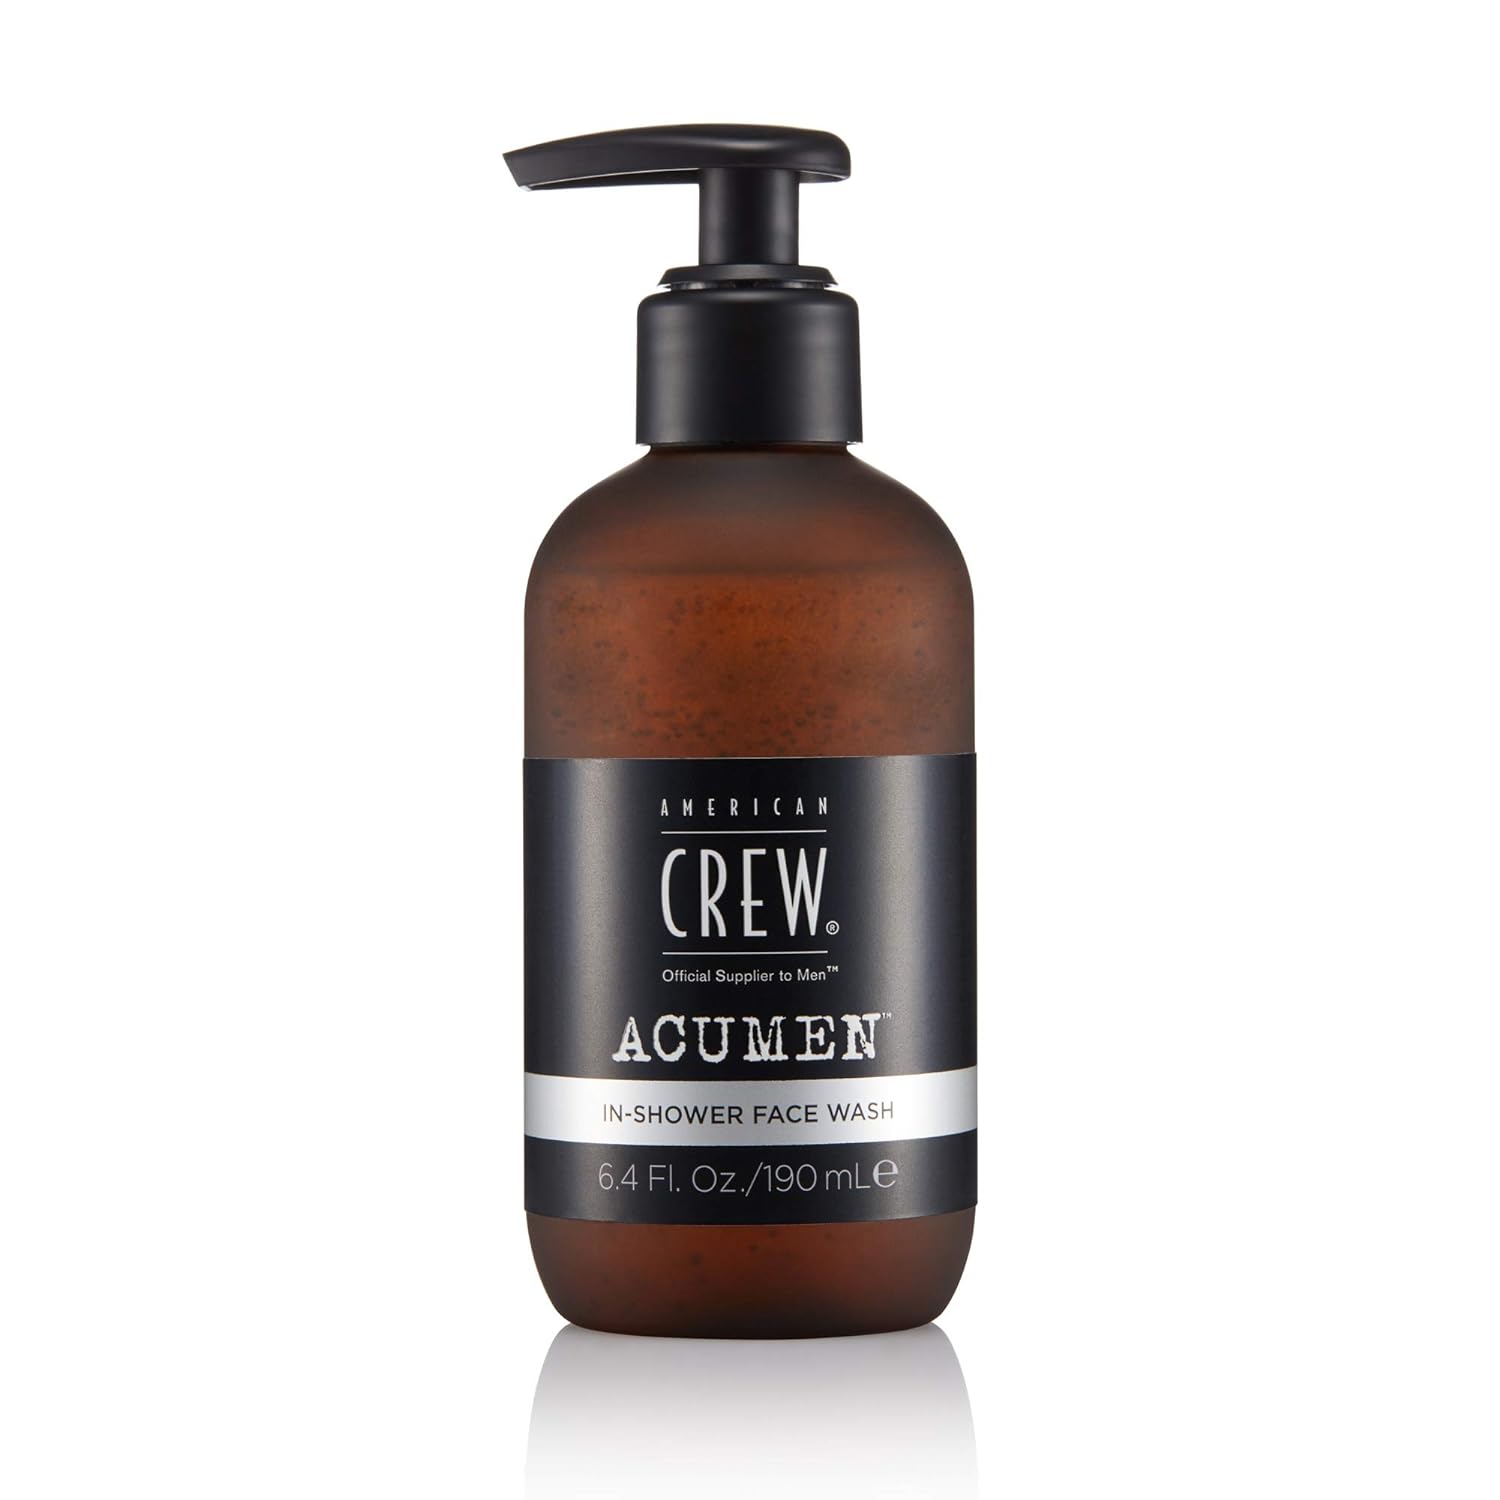 American Crew Men's Face Wash, In-Shower Facial Wash, Oil-Free, Removes Excess Oil & Dirt, 6.4 Fl Oz